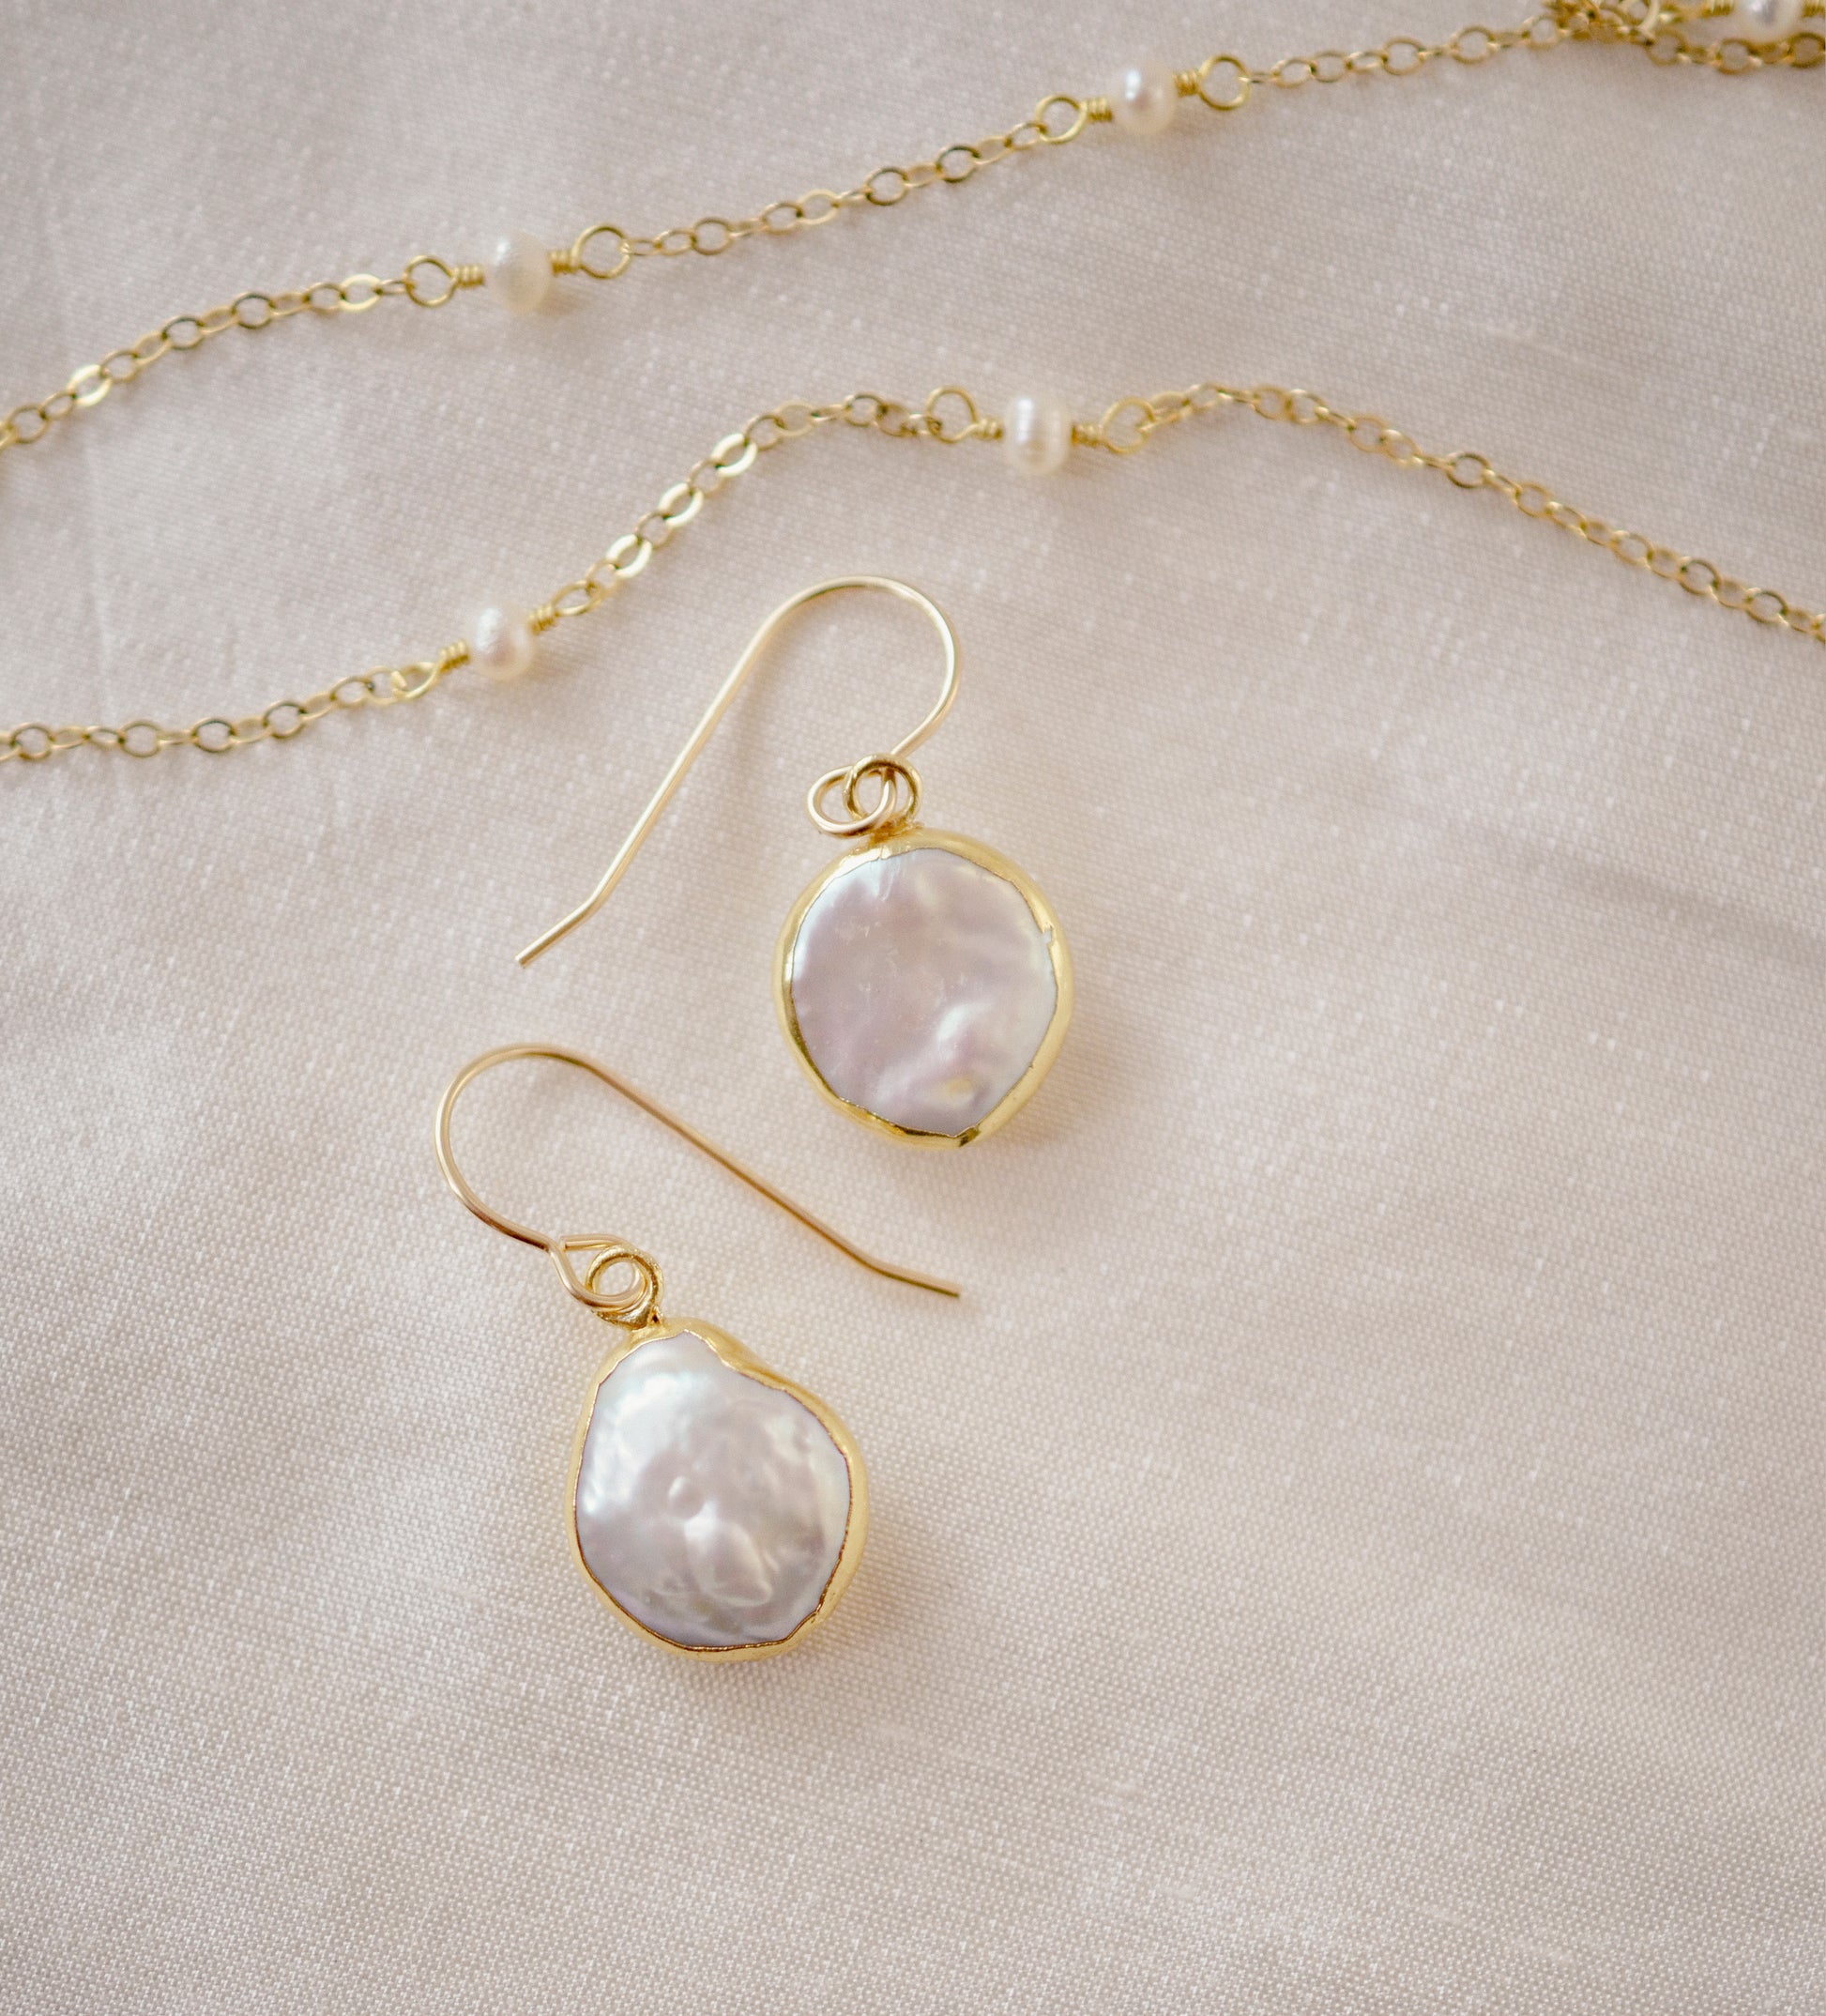 Natural white freshwater pearl dangle earring. The pearl is set in 22k gold electroplate and suspended from 14k gold filled earwires. Shown with our dainty pearl necklace.